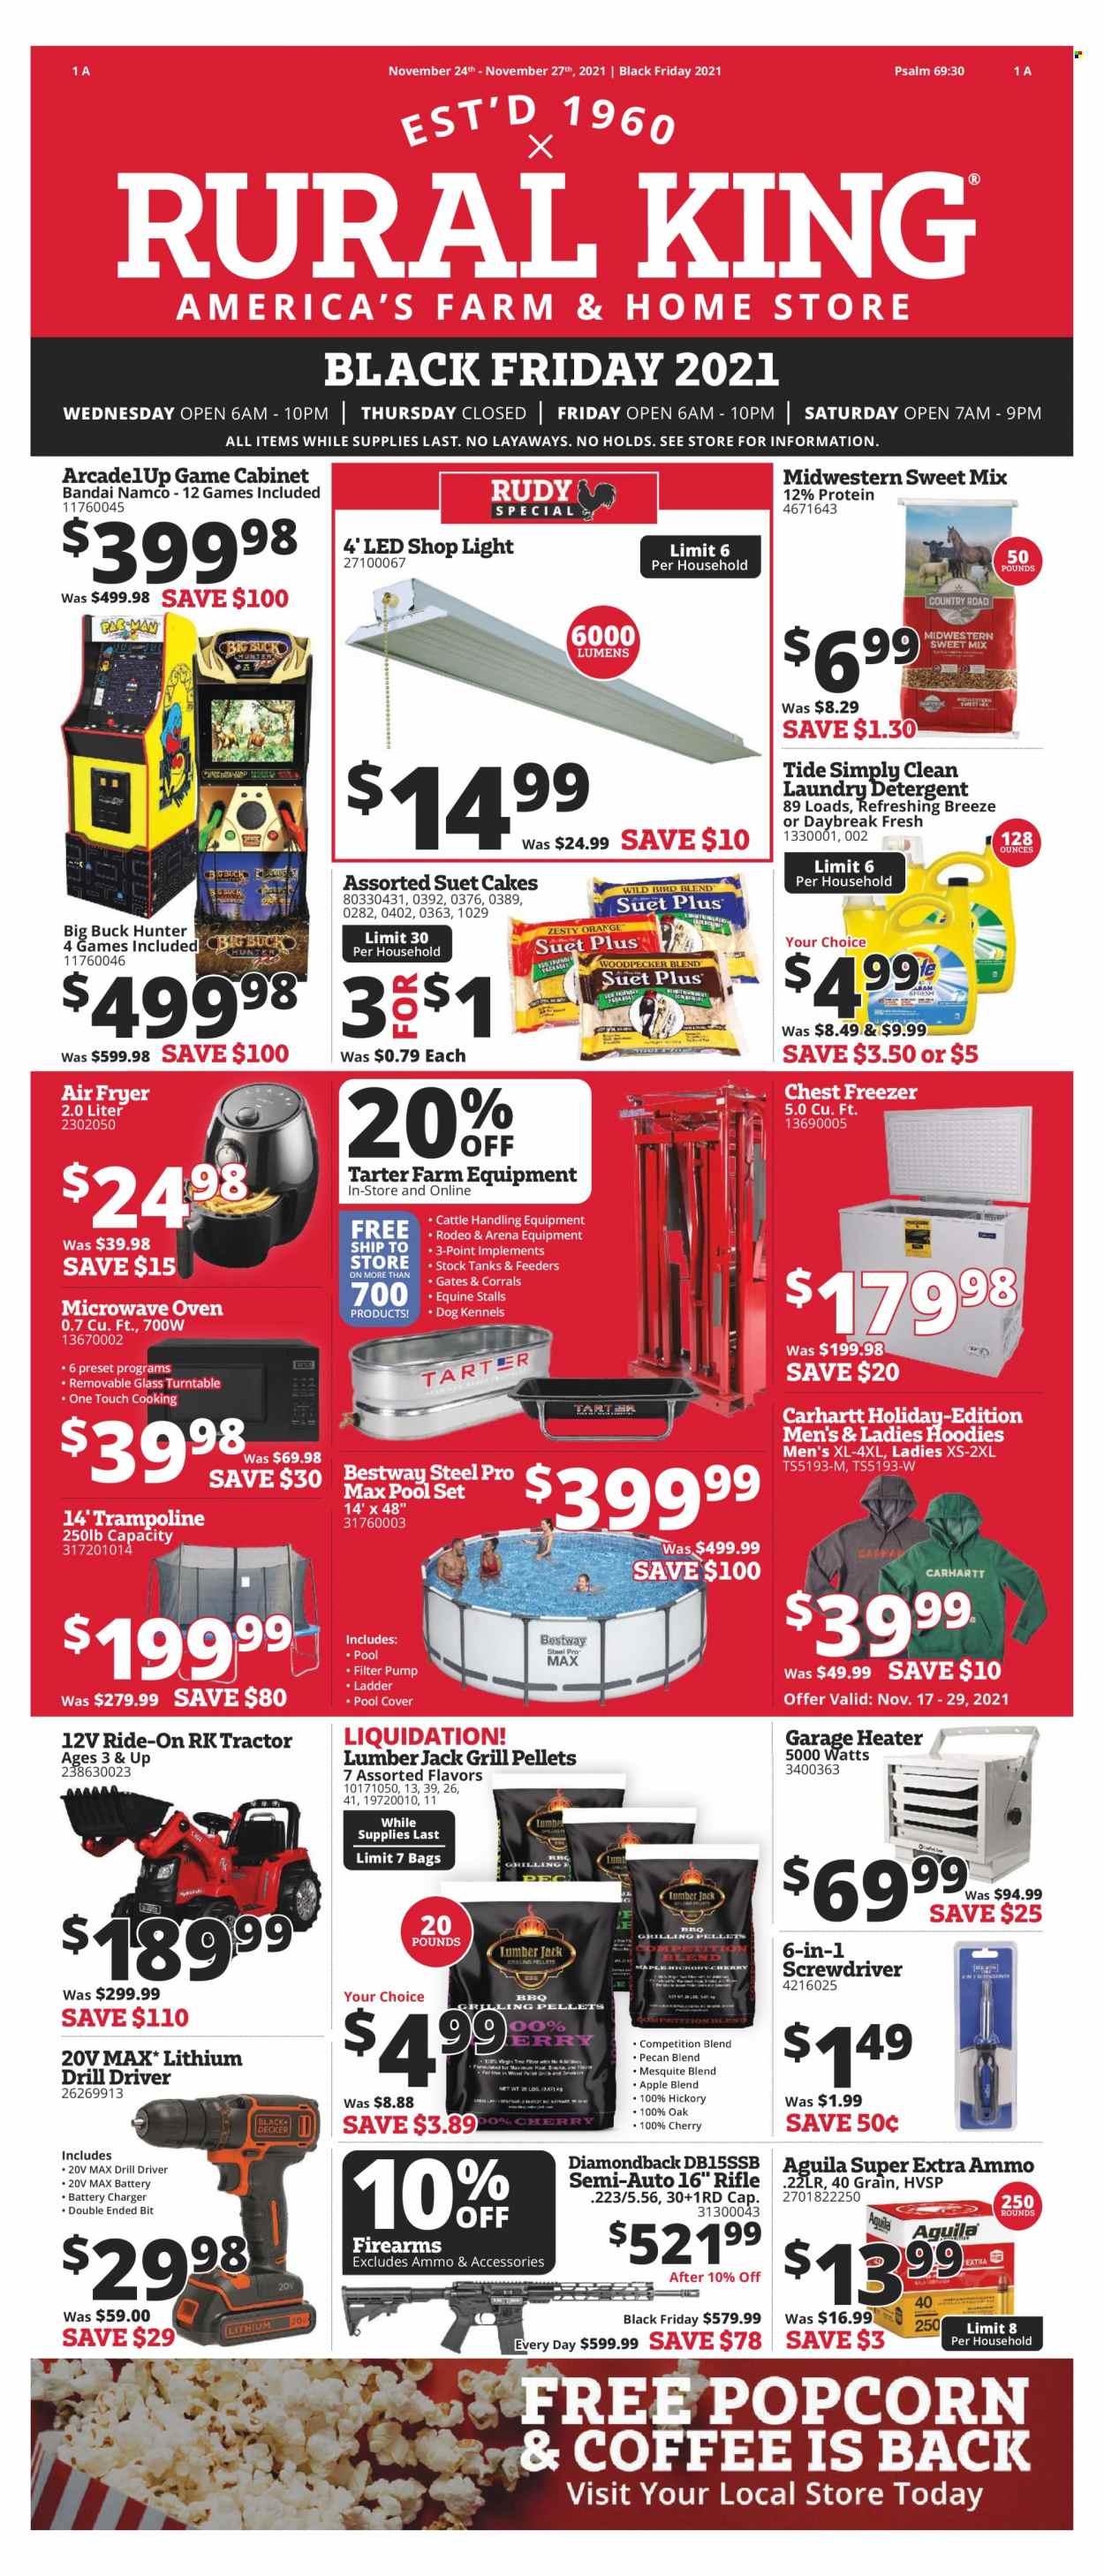 thumbnail - Rural King Flyer - 11/24/2021 - 11/27/2021 - Sales products - cake, Tide, laundry detergent, bag, battery charger, hoodie, tank, suet cakes, Apple, freezer, chest freezer, air fryer, Hunter, rifle, ammo, trampoline, tractor, ladder, shop light, drill, screwdriver, cabinet, grill, pool, pump. Page 1.